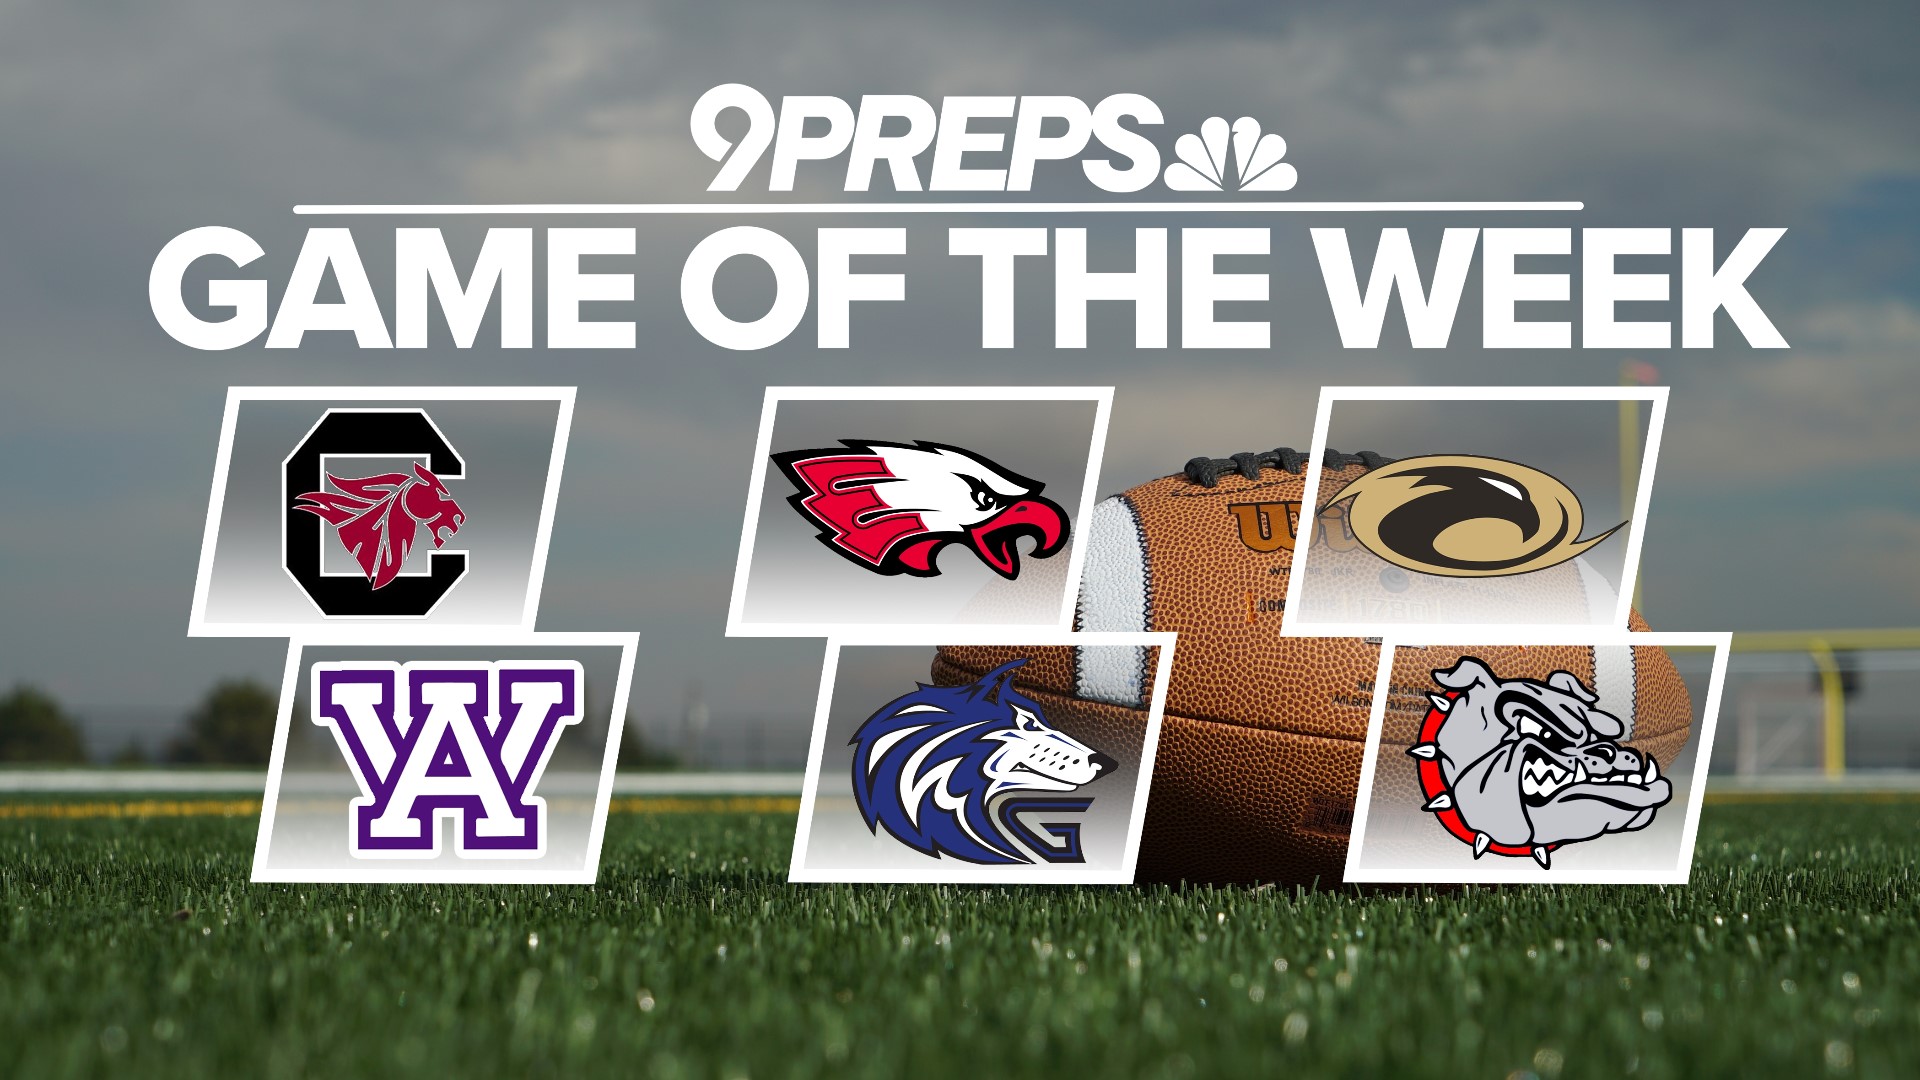 The 9Preps Game of the Week rolls on! Vote to determine which high school football game we showcase on Friday, Sept. 29.